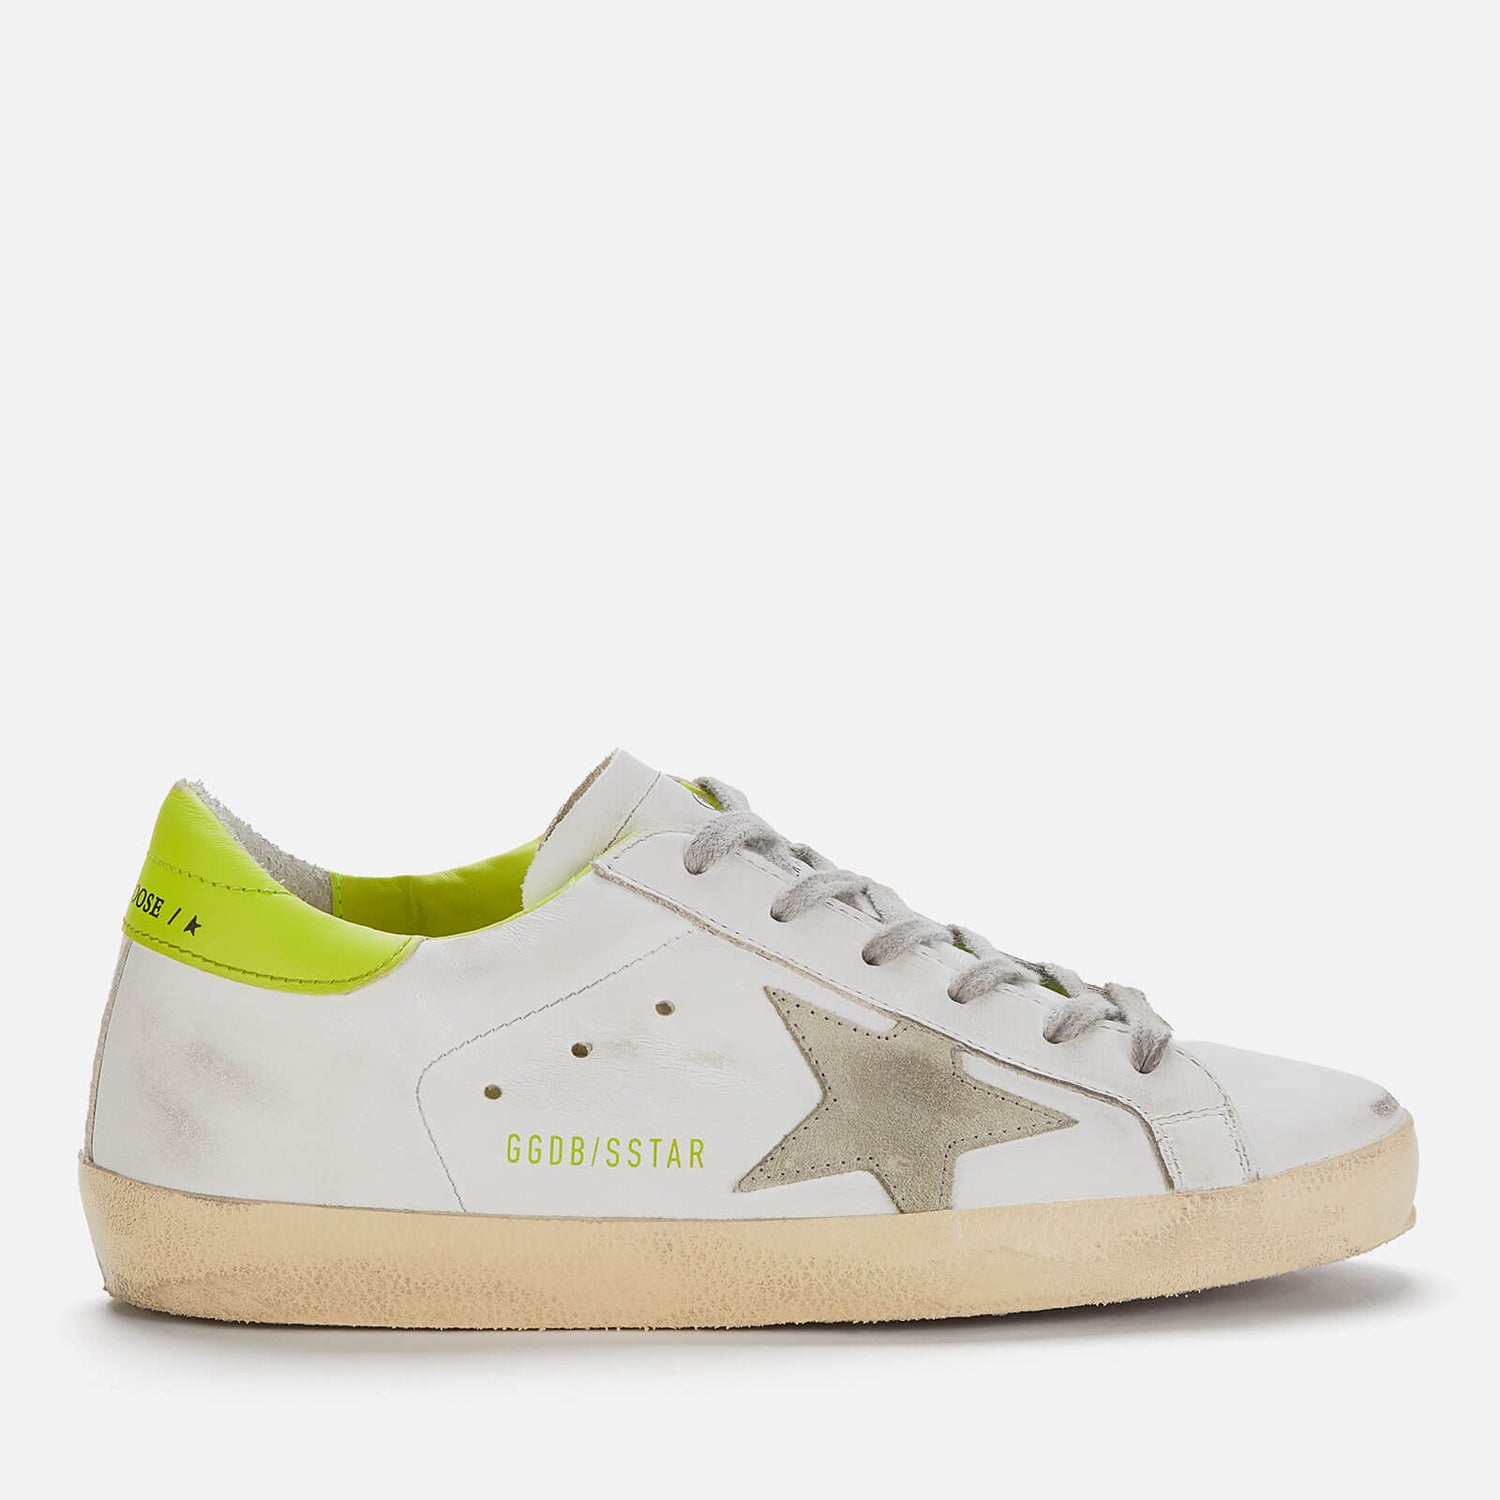 Golden Goose Women's Superstar Leather Trainers - White/Ice/Lime Green - UK 7